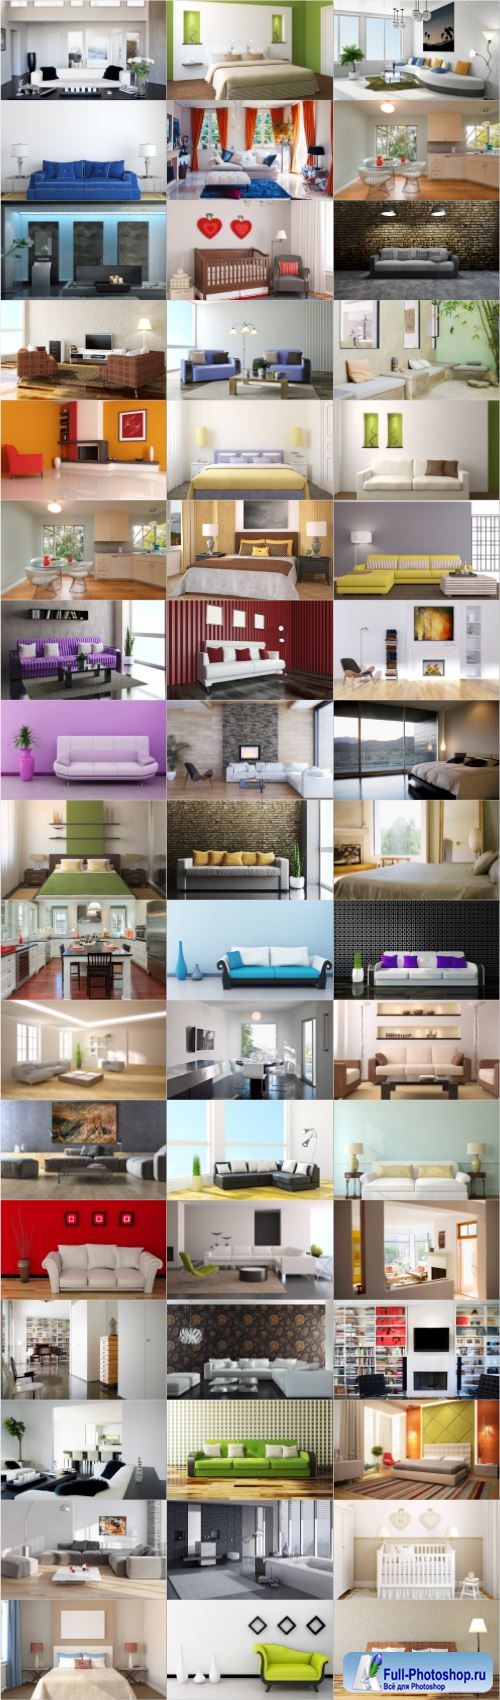 Modern interior large selection of stock photos